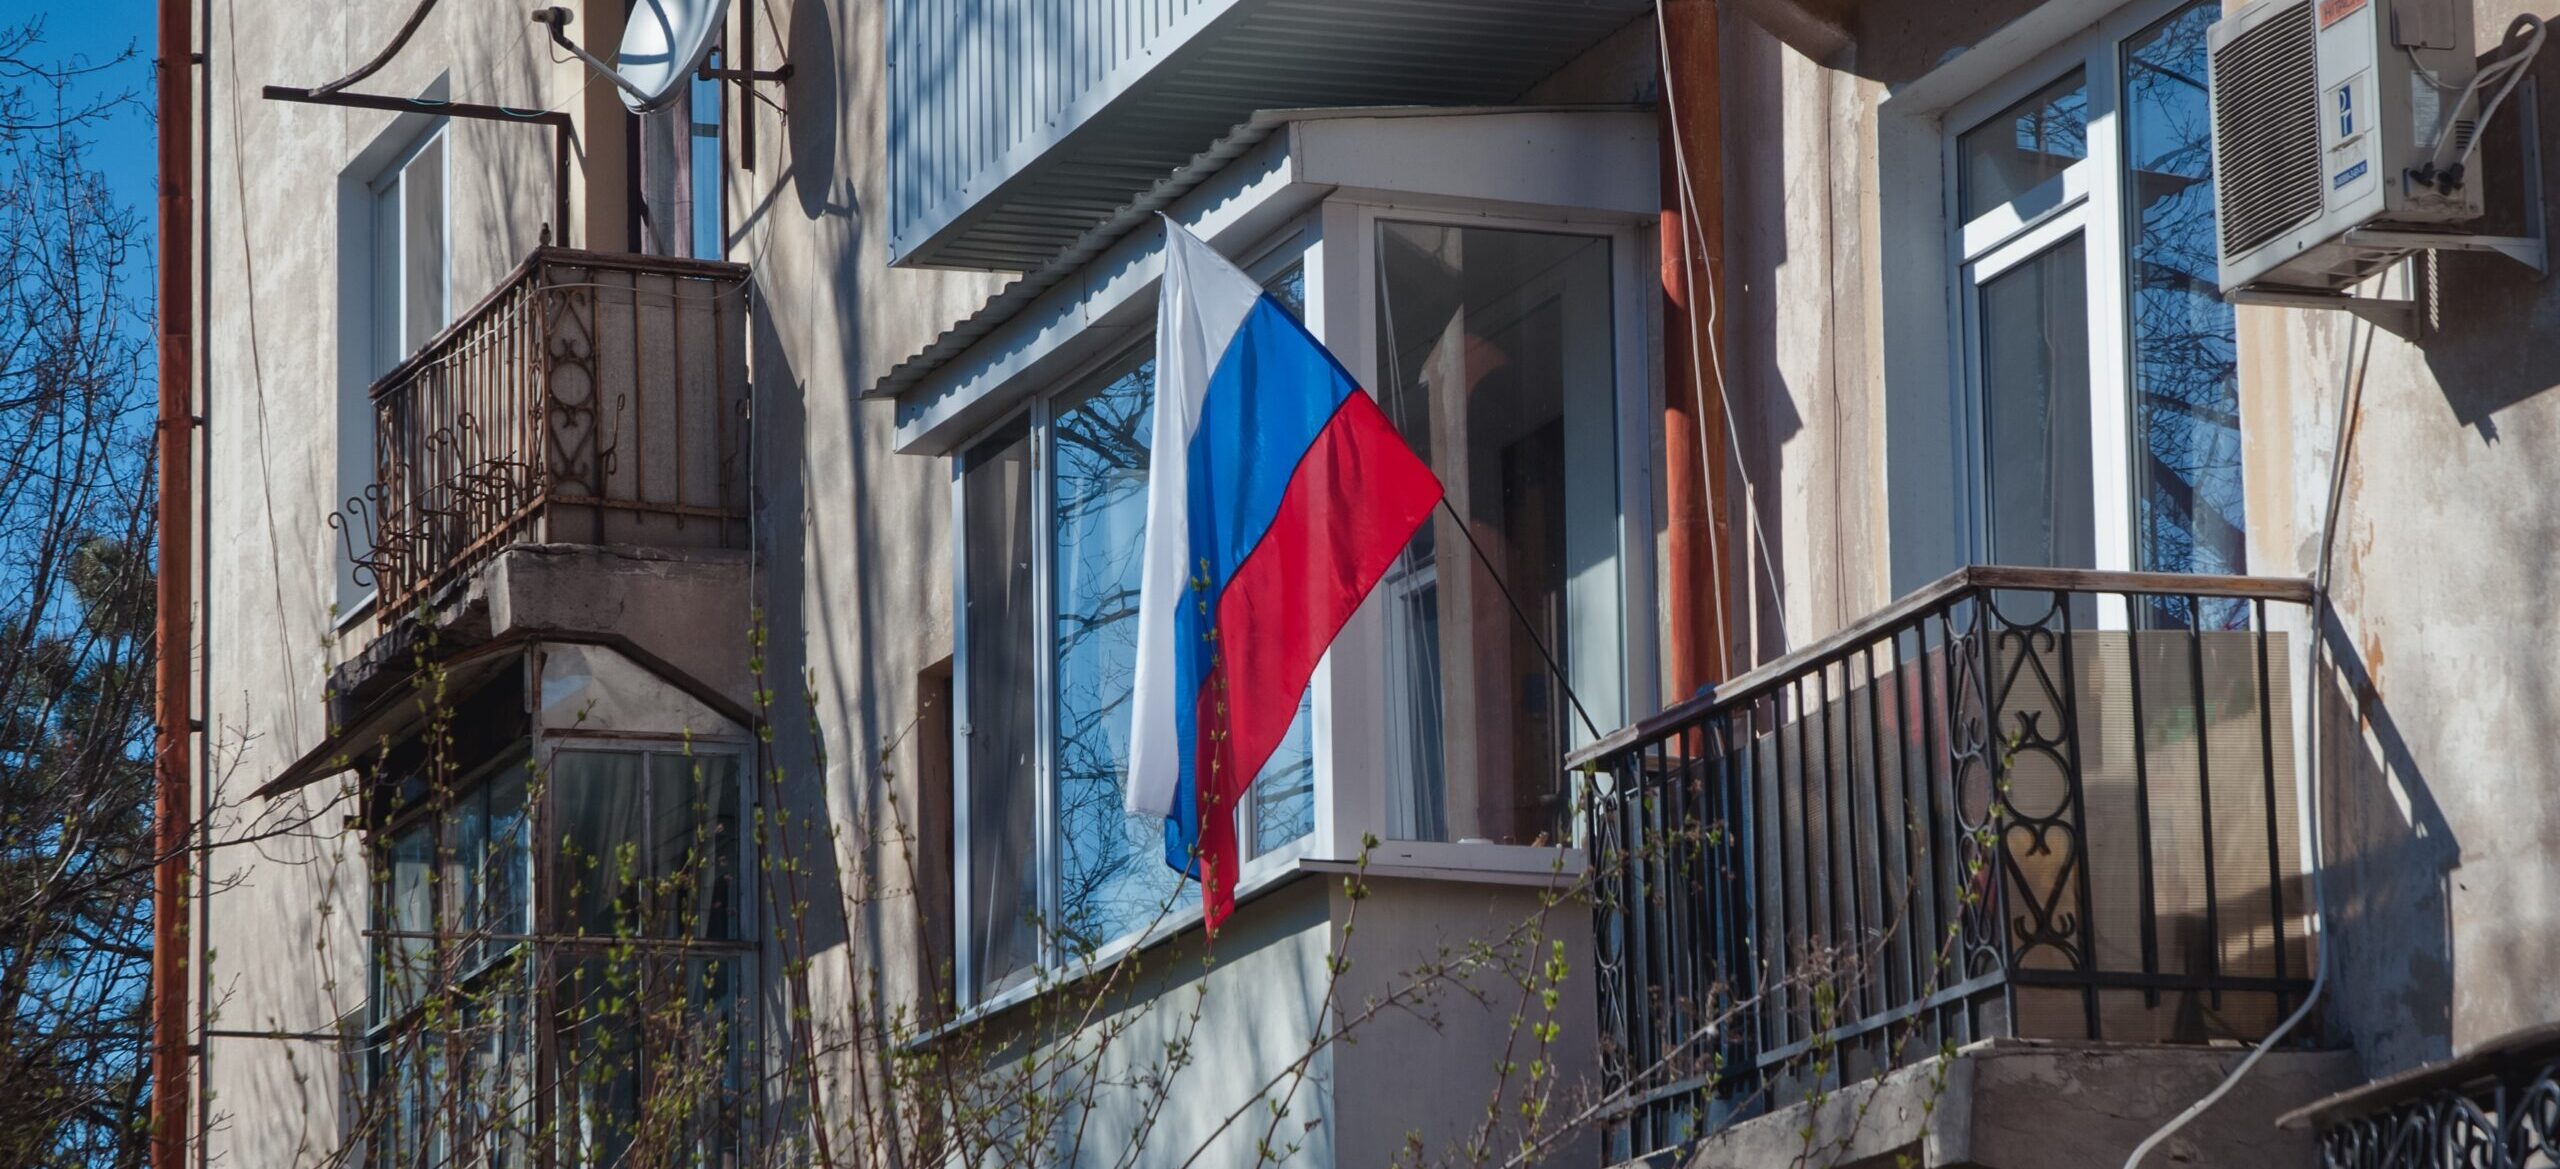 Occupied territories: Russians seize homes from Ukrainian residents